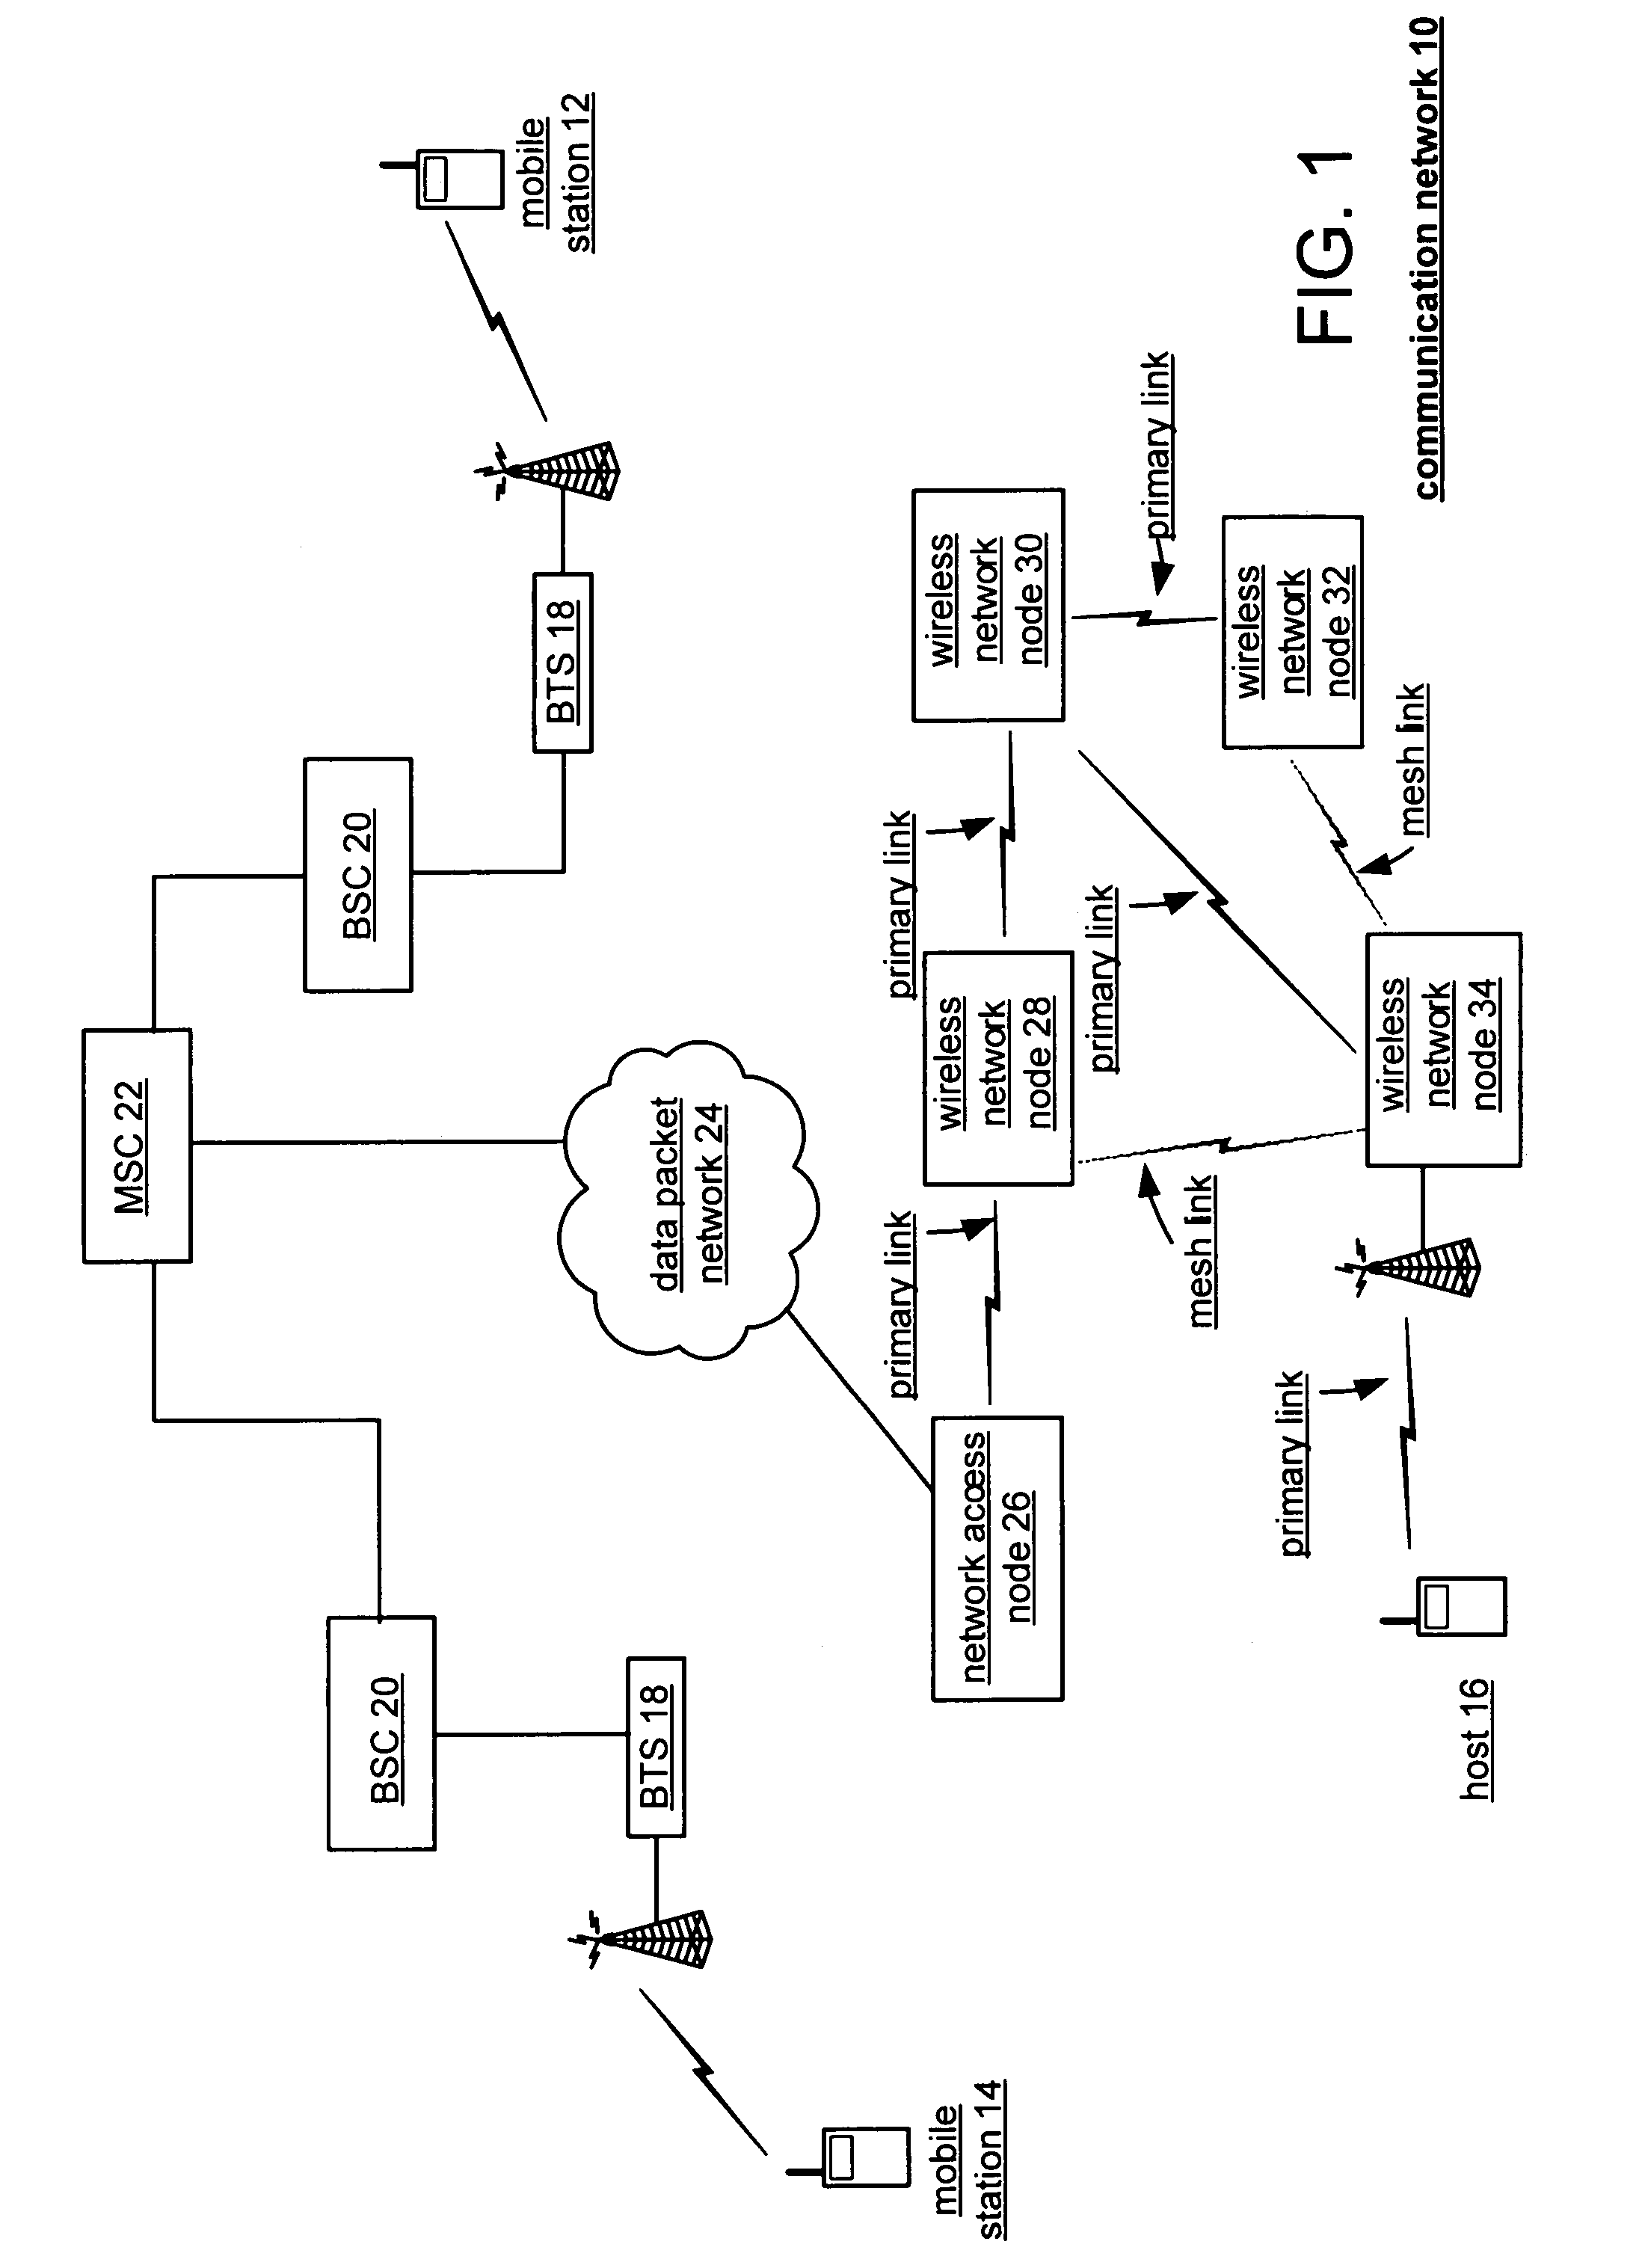 Self-selection of radio frequency channels to reduce co-channel and adjacent channel interference in a wireless distributed network